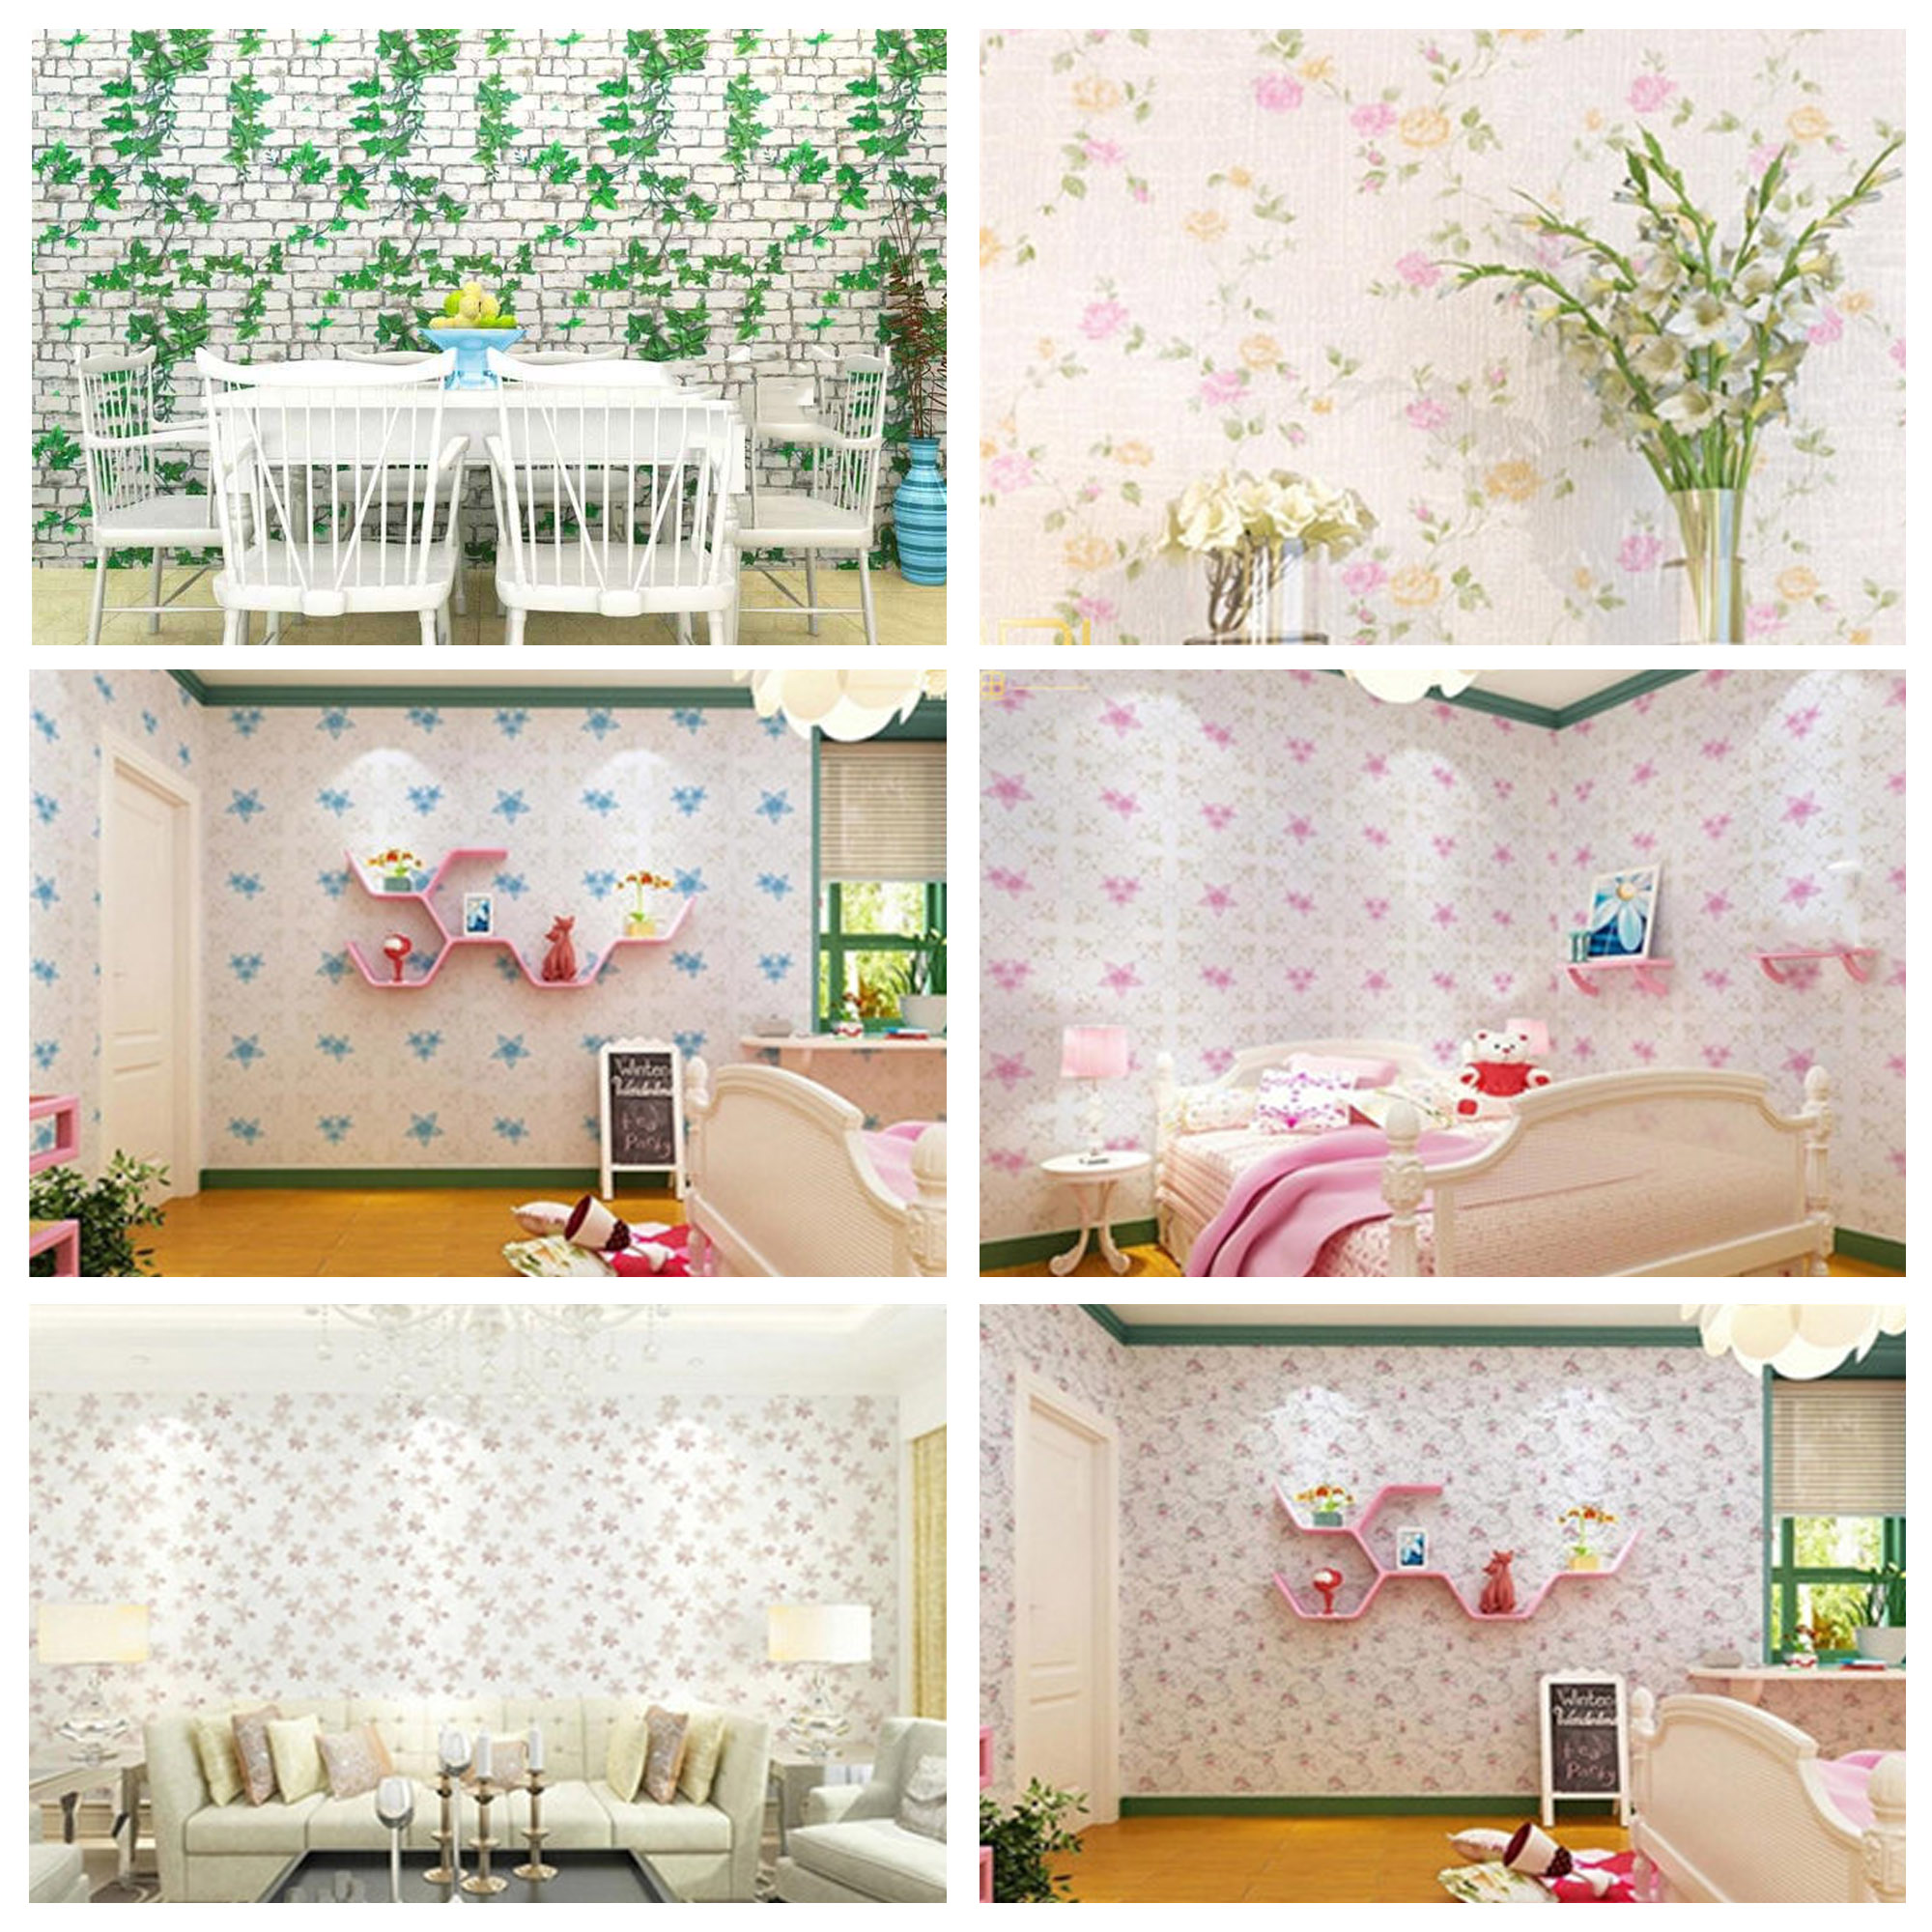 DODOING 3D Peel and Stick Wallpaper, Modern Non-Woven Flower Pattern Wallpaper Home Decor Wallpaper for Home Living Room Bedroom Indoor and TV Background, 1.5x3.3ft/ 1.5x16.4ft/ 1.5x33ft - image 4 of 4